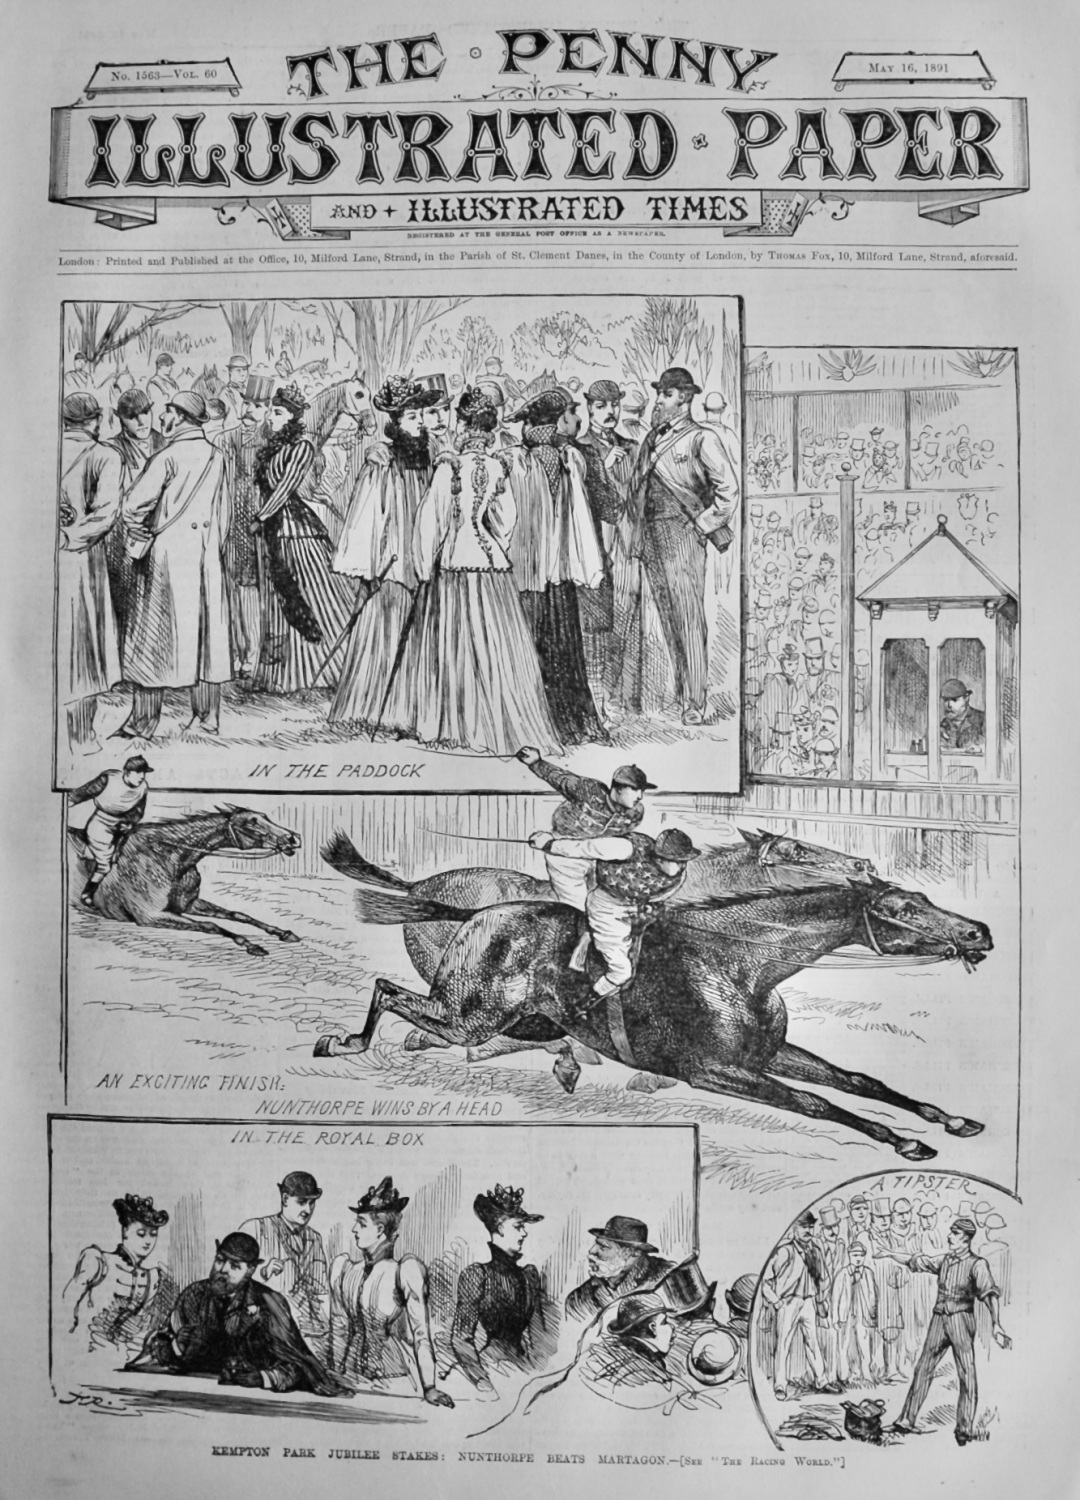 The Penny Illustrated Paper & Illustrated Times.  May 16th 1891.